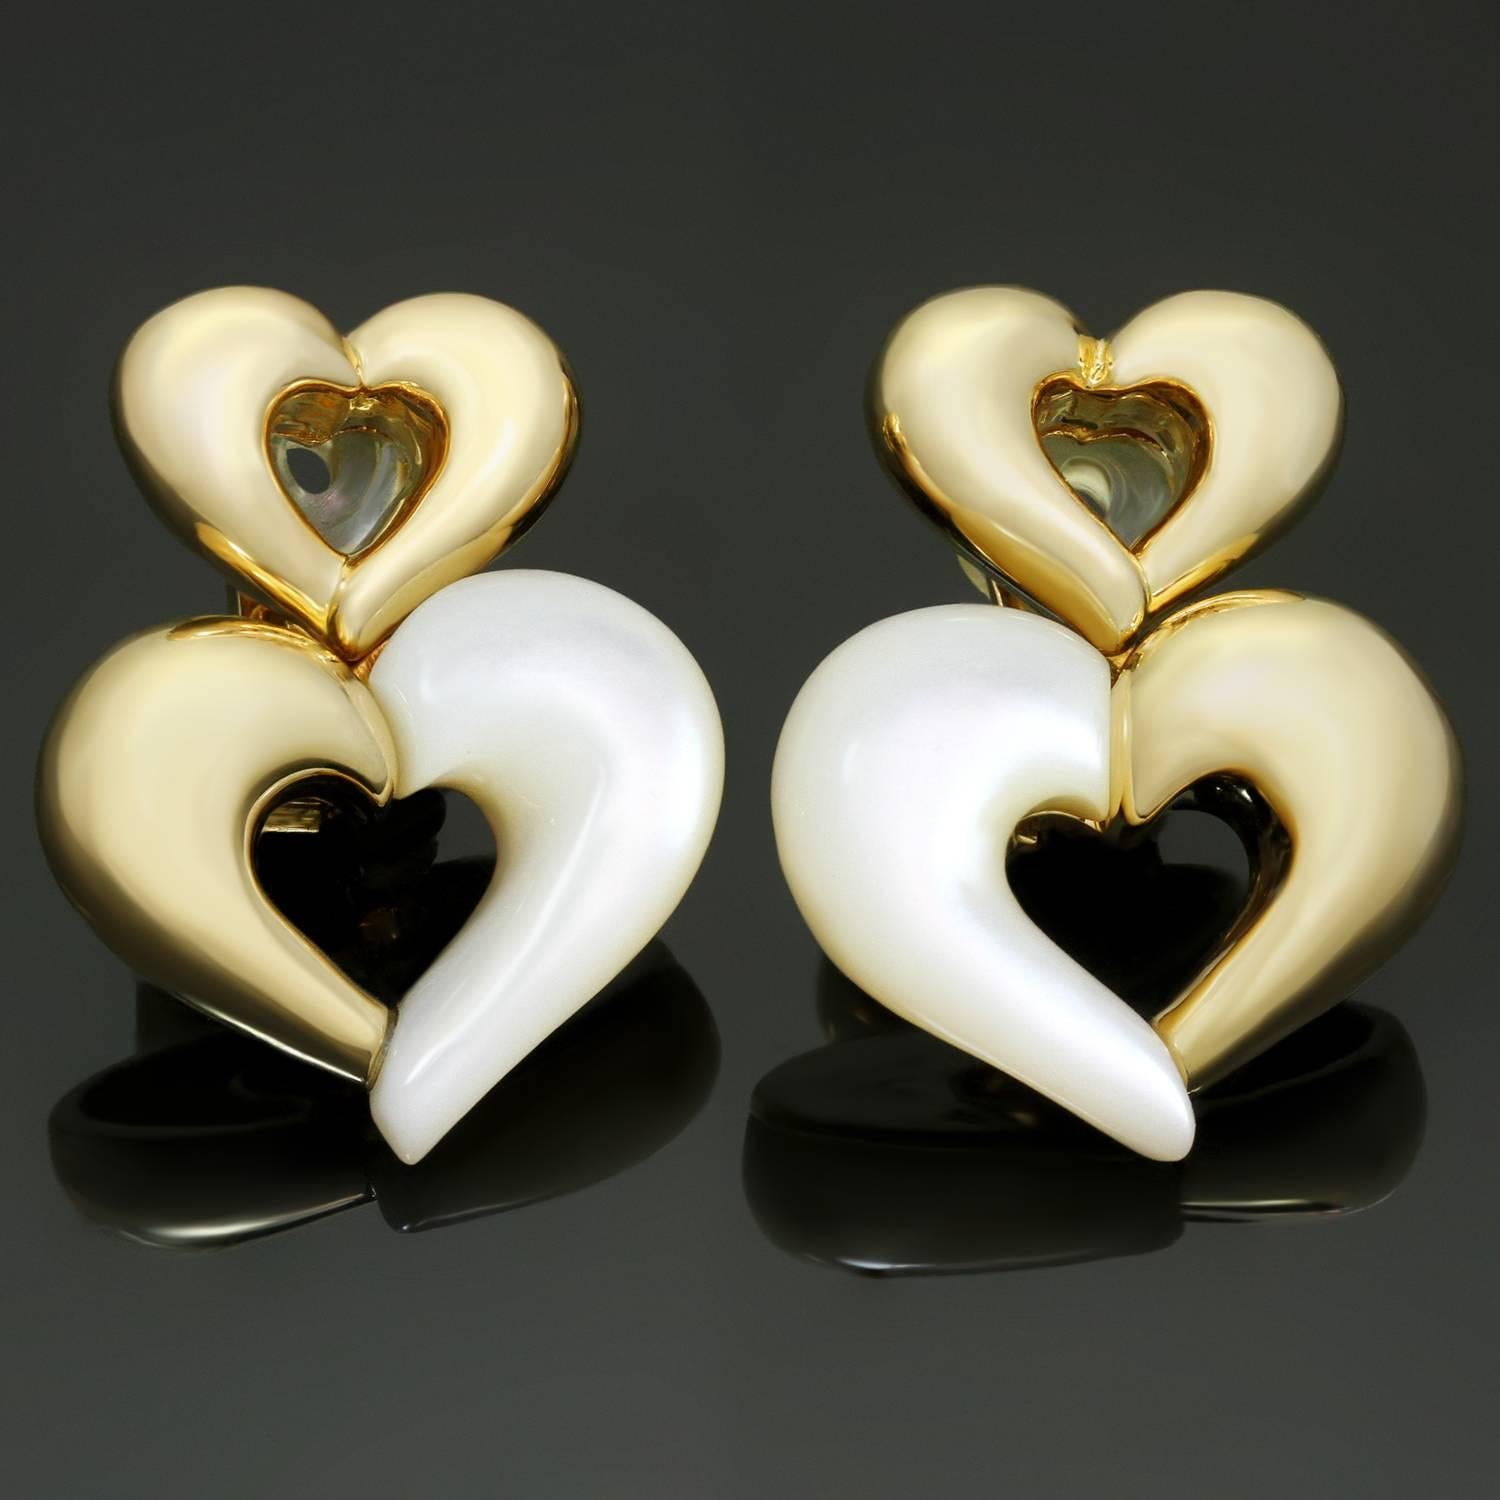 These stunning Van Cleef & Arpels clip-on earrings feature a chic heart-shaped design crafted in 18k yellow gold and mother-of-pearl. Made in France circa 1990s. Measurements: 0.86